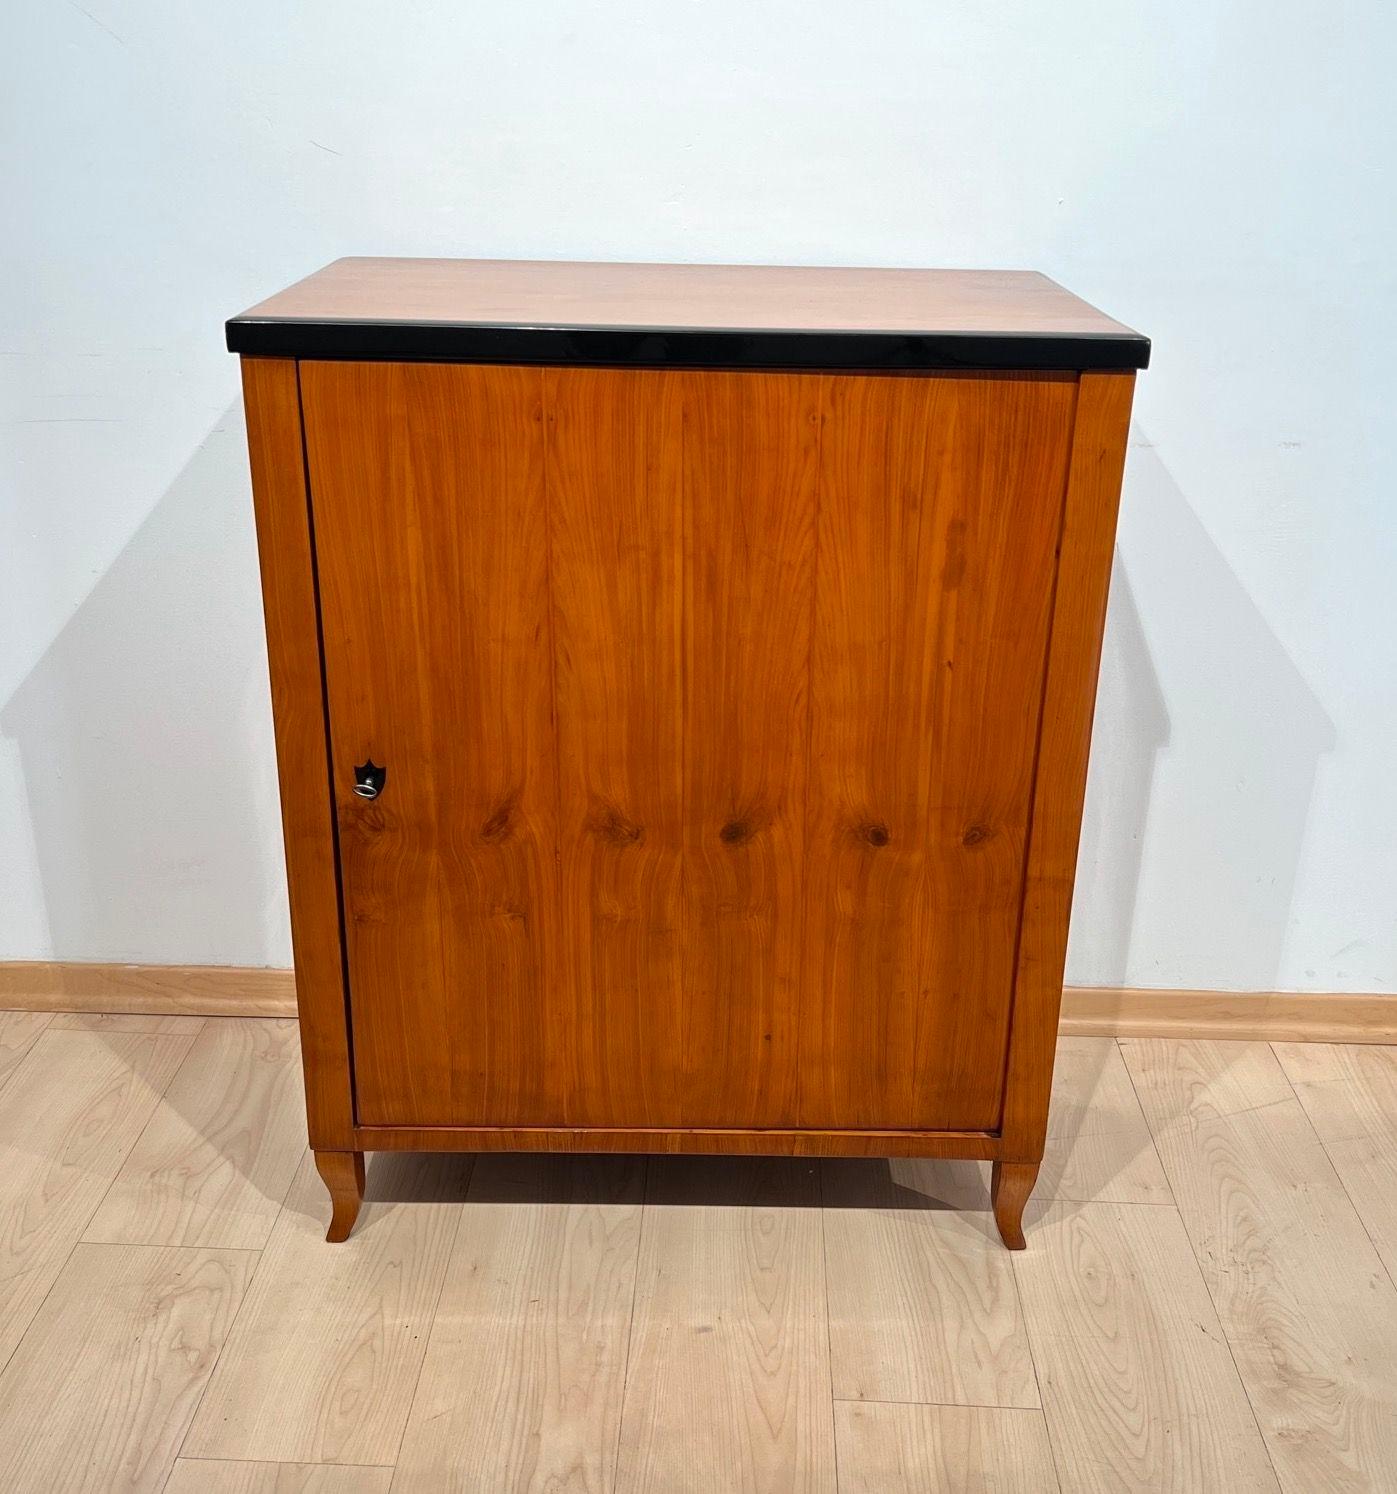 Beautif, unadorned neoclassical Biedermeier Half-cabinet, Pillar Cabinet or small furniture in Cherry Veneer from South Germany, early 19th century, circa 1820.
Beautif Cherry wood book-matched thick veneered on softwood. Door counter-veneered in